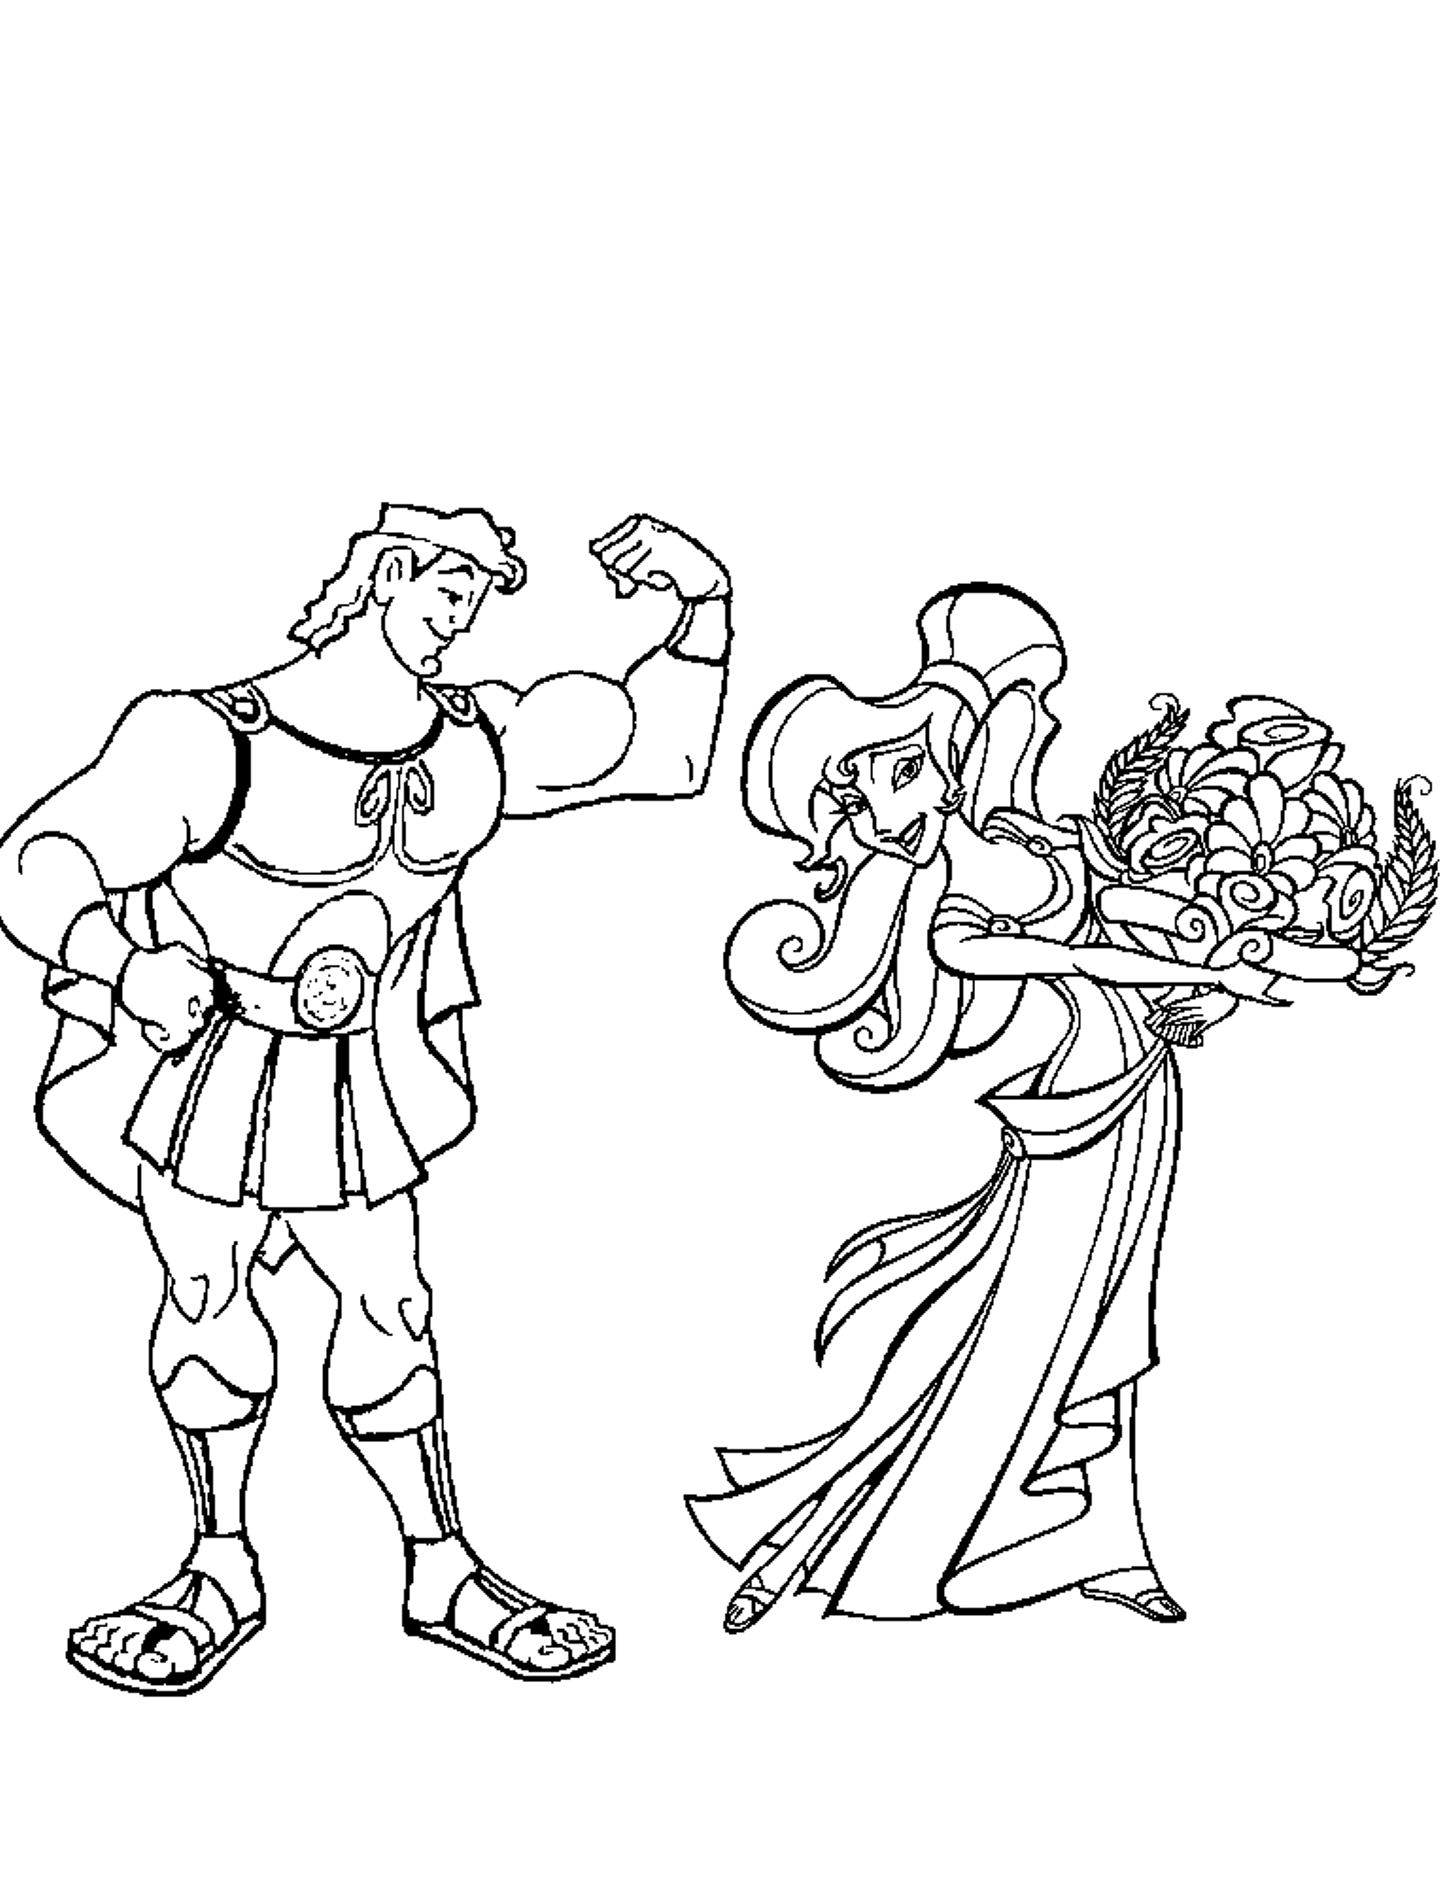 Hercules Cartoon Coloring Pages | Cartoon Coloring pages of ...